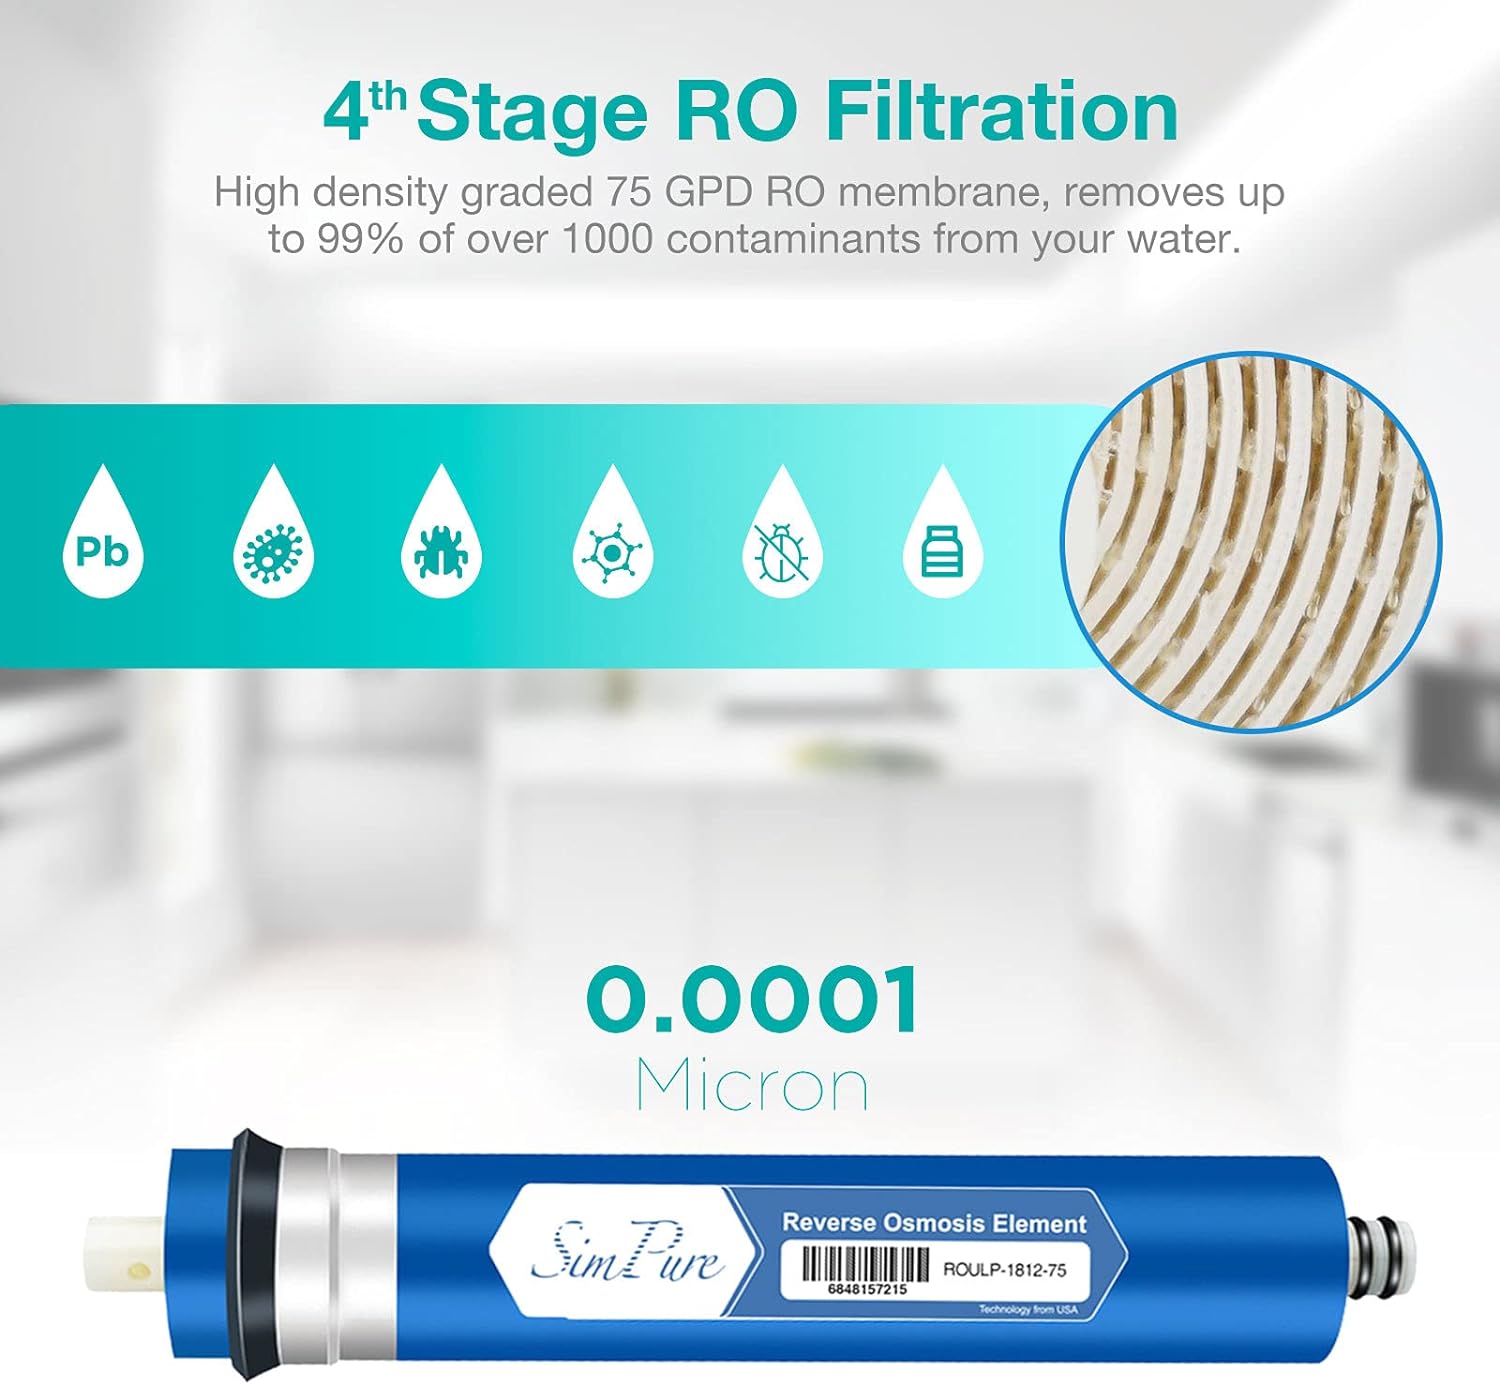 SimPure 5 Stage Reverse Osmosis Replacement Filter Set with 75 GPD RO Membrane, 5pc Pre & Post Replacement Cartridge Pack Kit for Standard 5-Stage Reverse Osmosis RO Systems